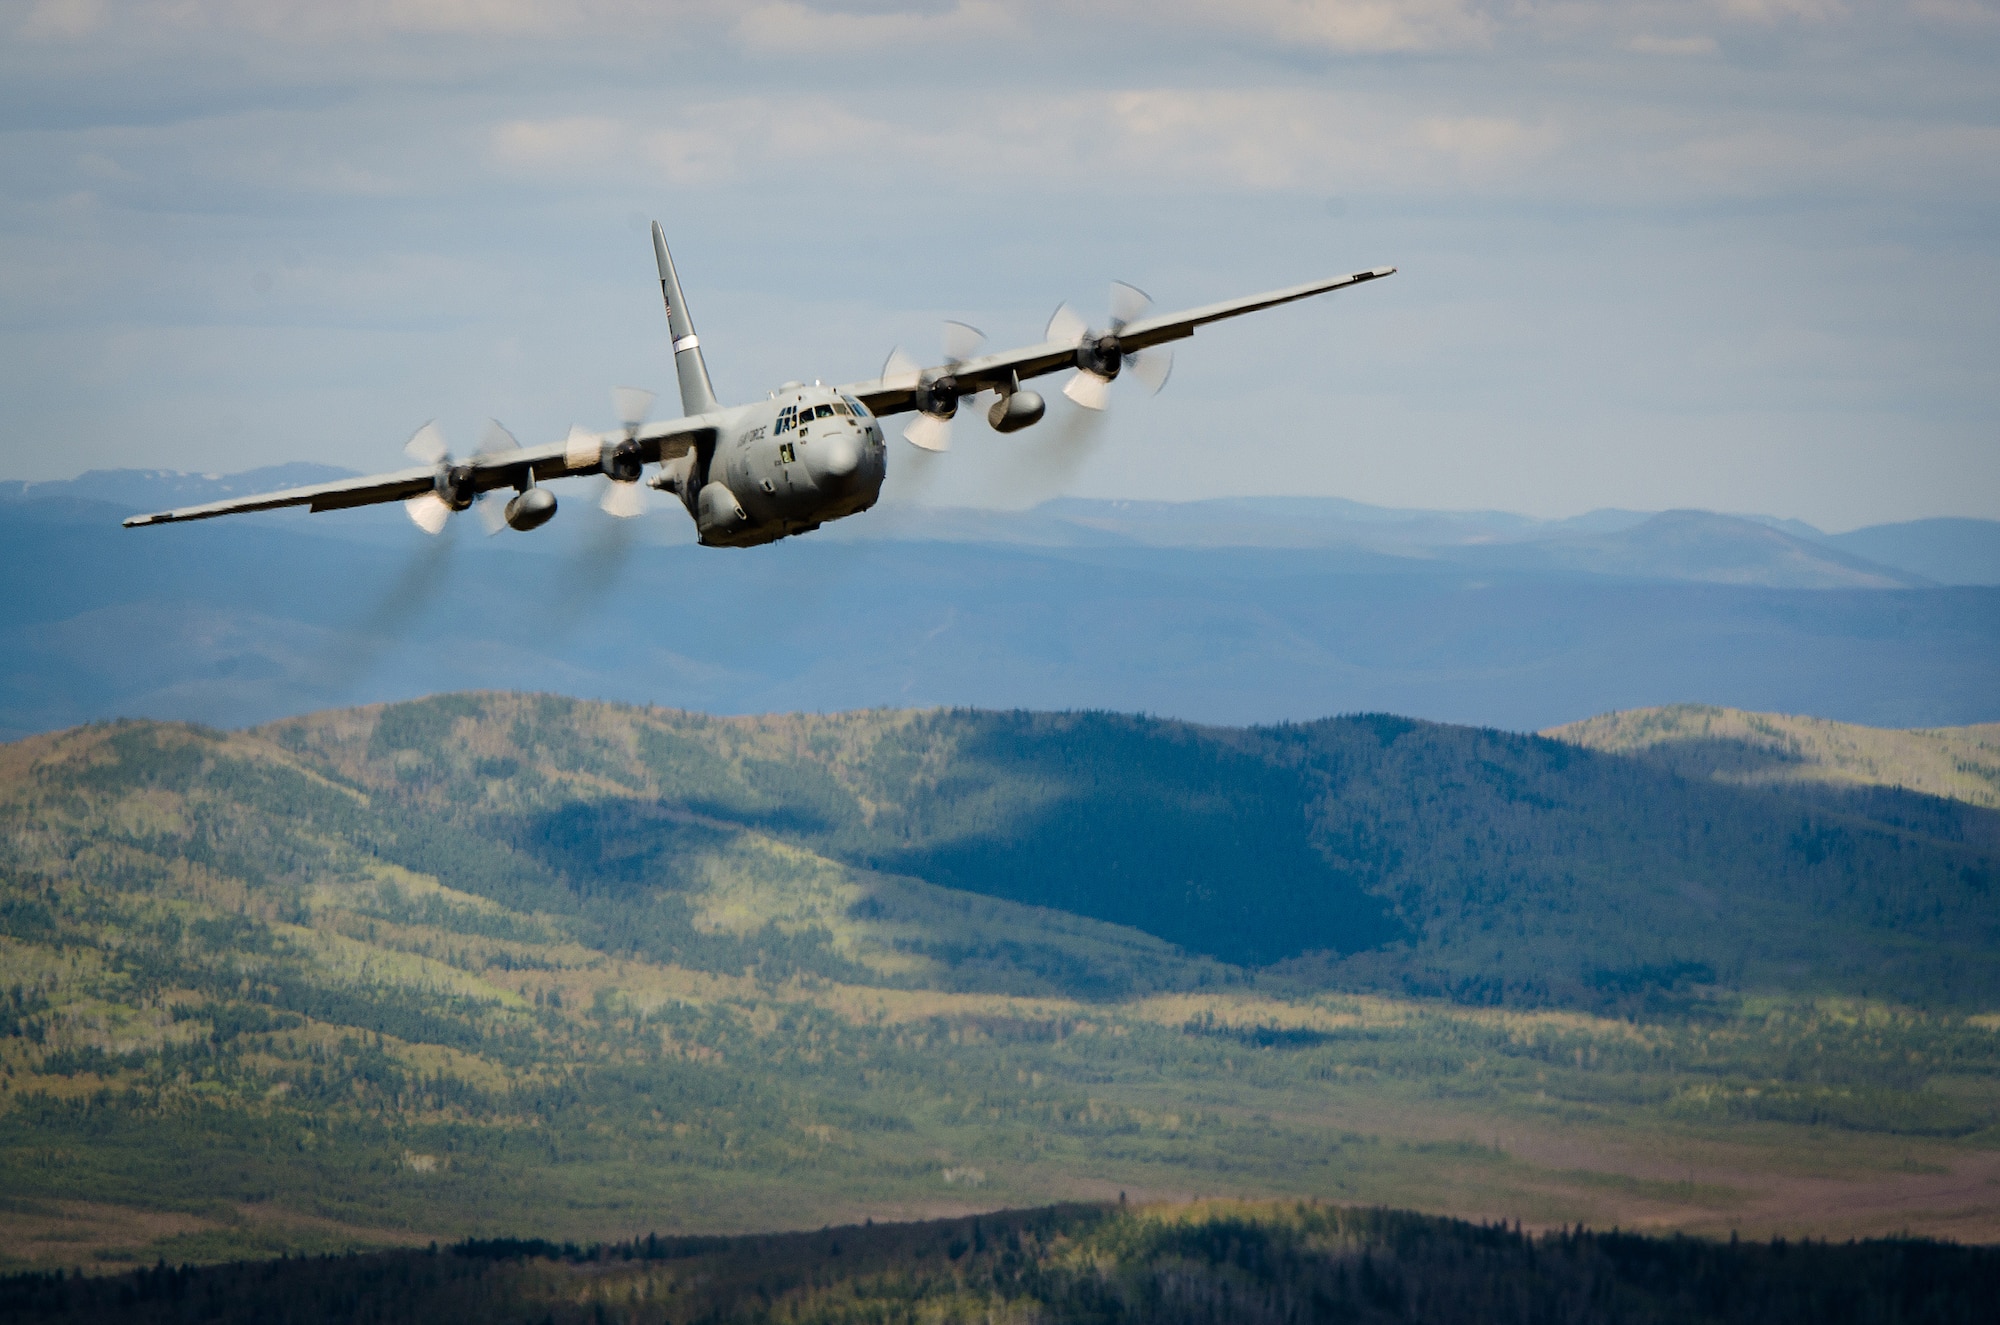 A Kentucky Air National Guard C-130 flies over Alaska on May 9, 2014, in support of Exercise Red Flag-Alaska. More than 100 Kentucky Airmen from the 123rd Airlift Wing participated in the exercise from May 7 to May 23. Red Flag-Alaska is designed to hone the combat skills of U.S. Air Force flight crews. (U.S. Air National Guard photo by Master Sgt. Phil Speck)